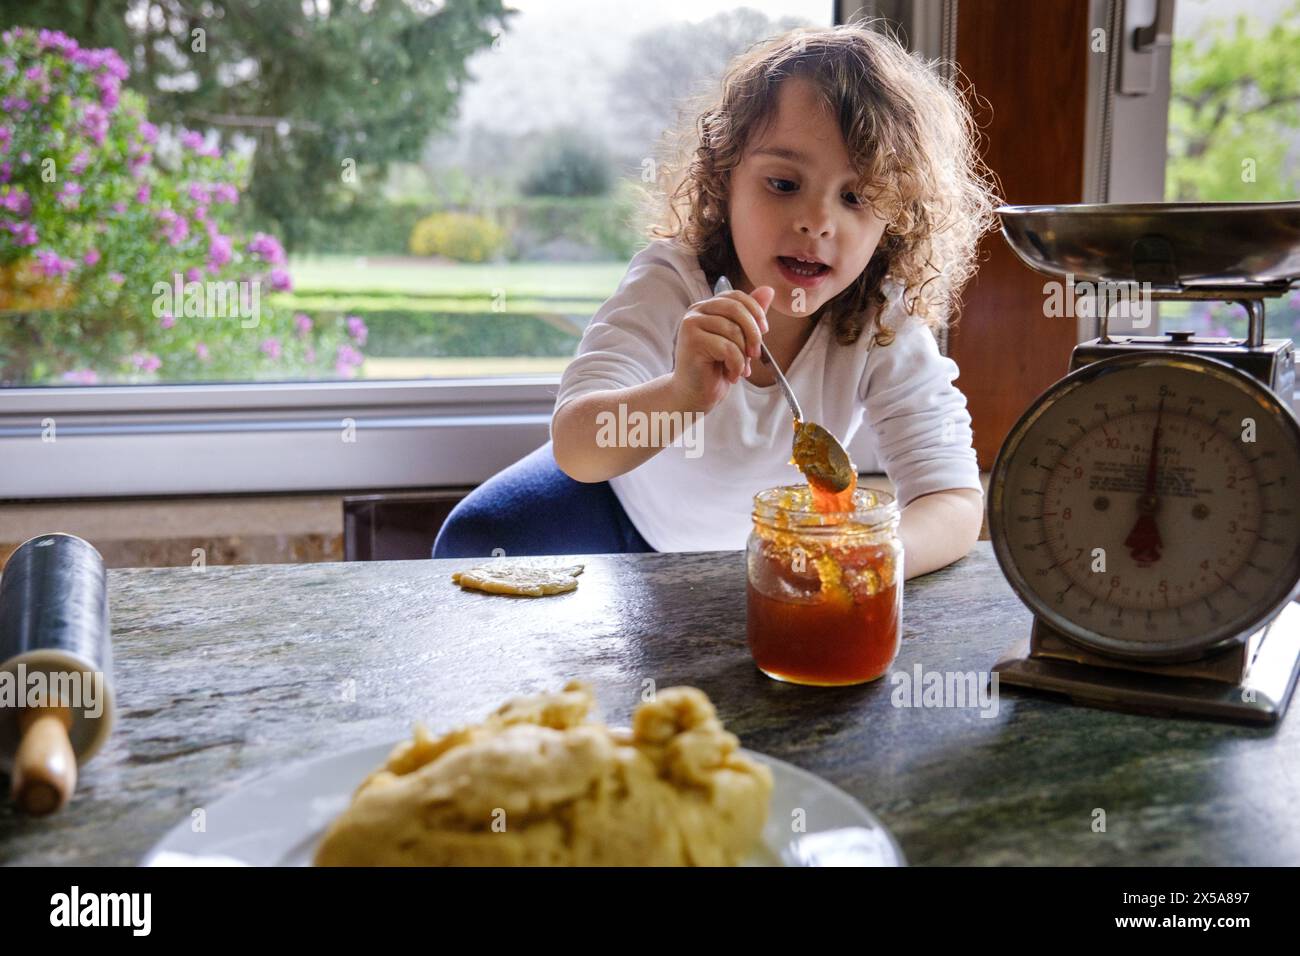 Curious child baking in a home kitchen with dough, a rolling pin, and jam next to a vintage scale, with a garden view window Stock Photo